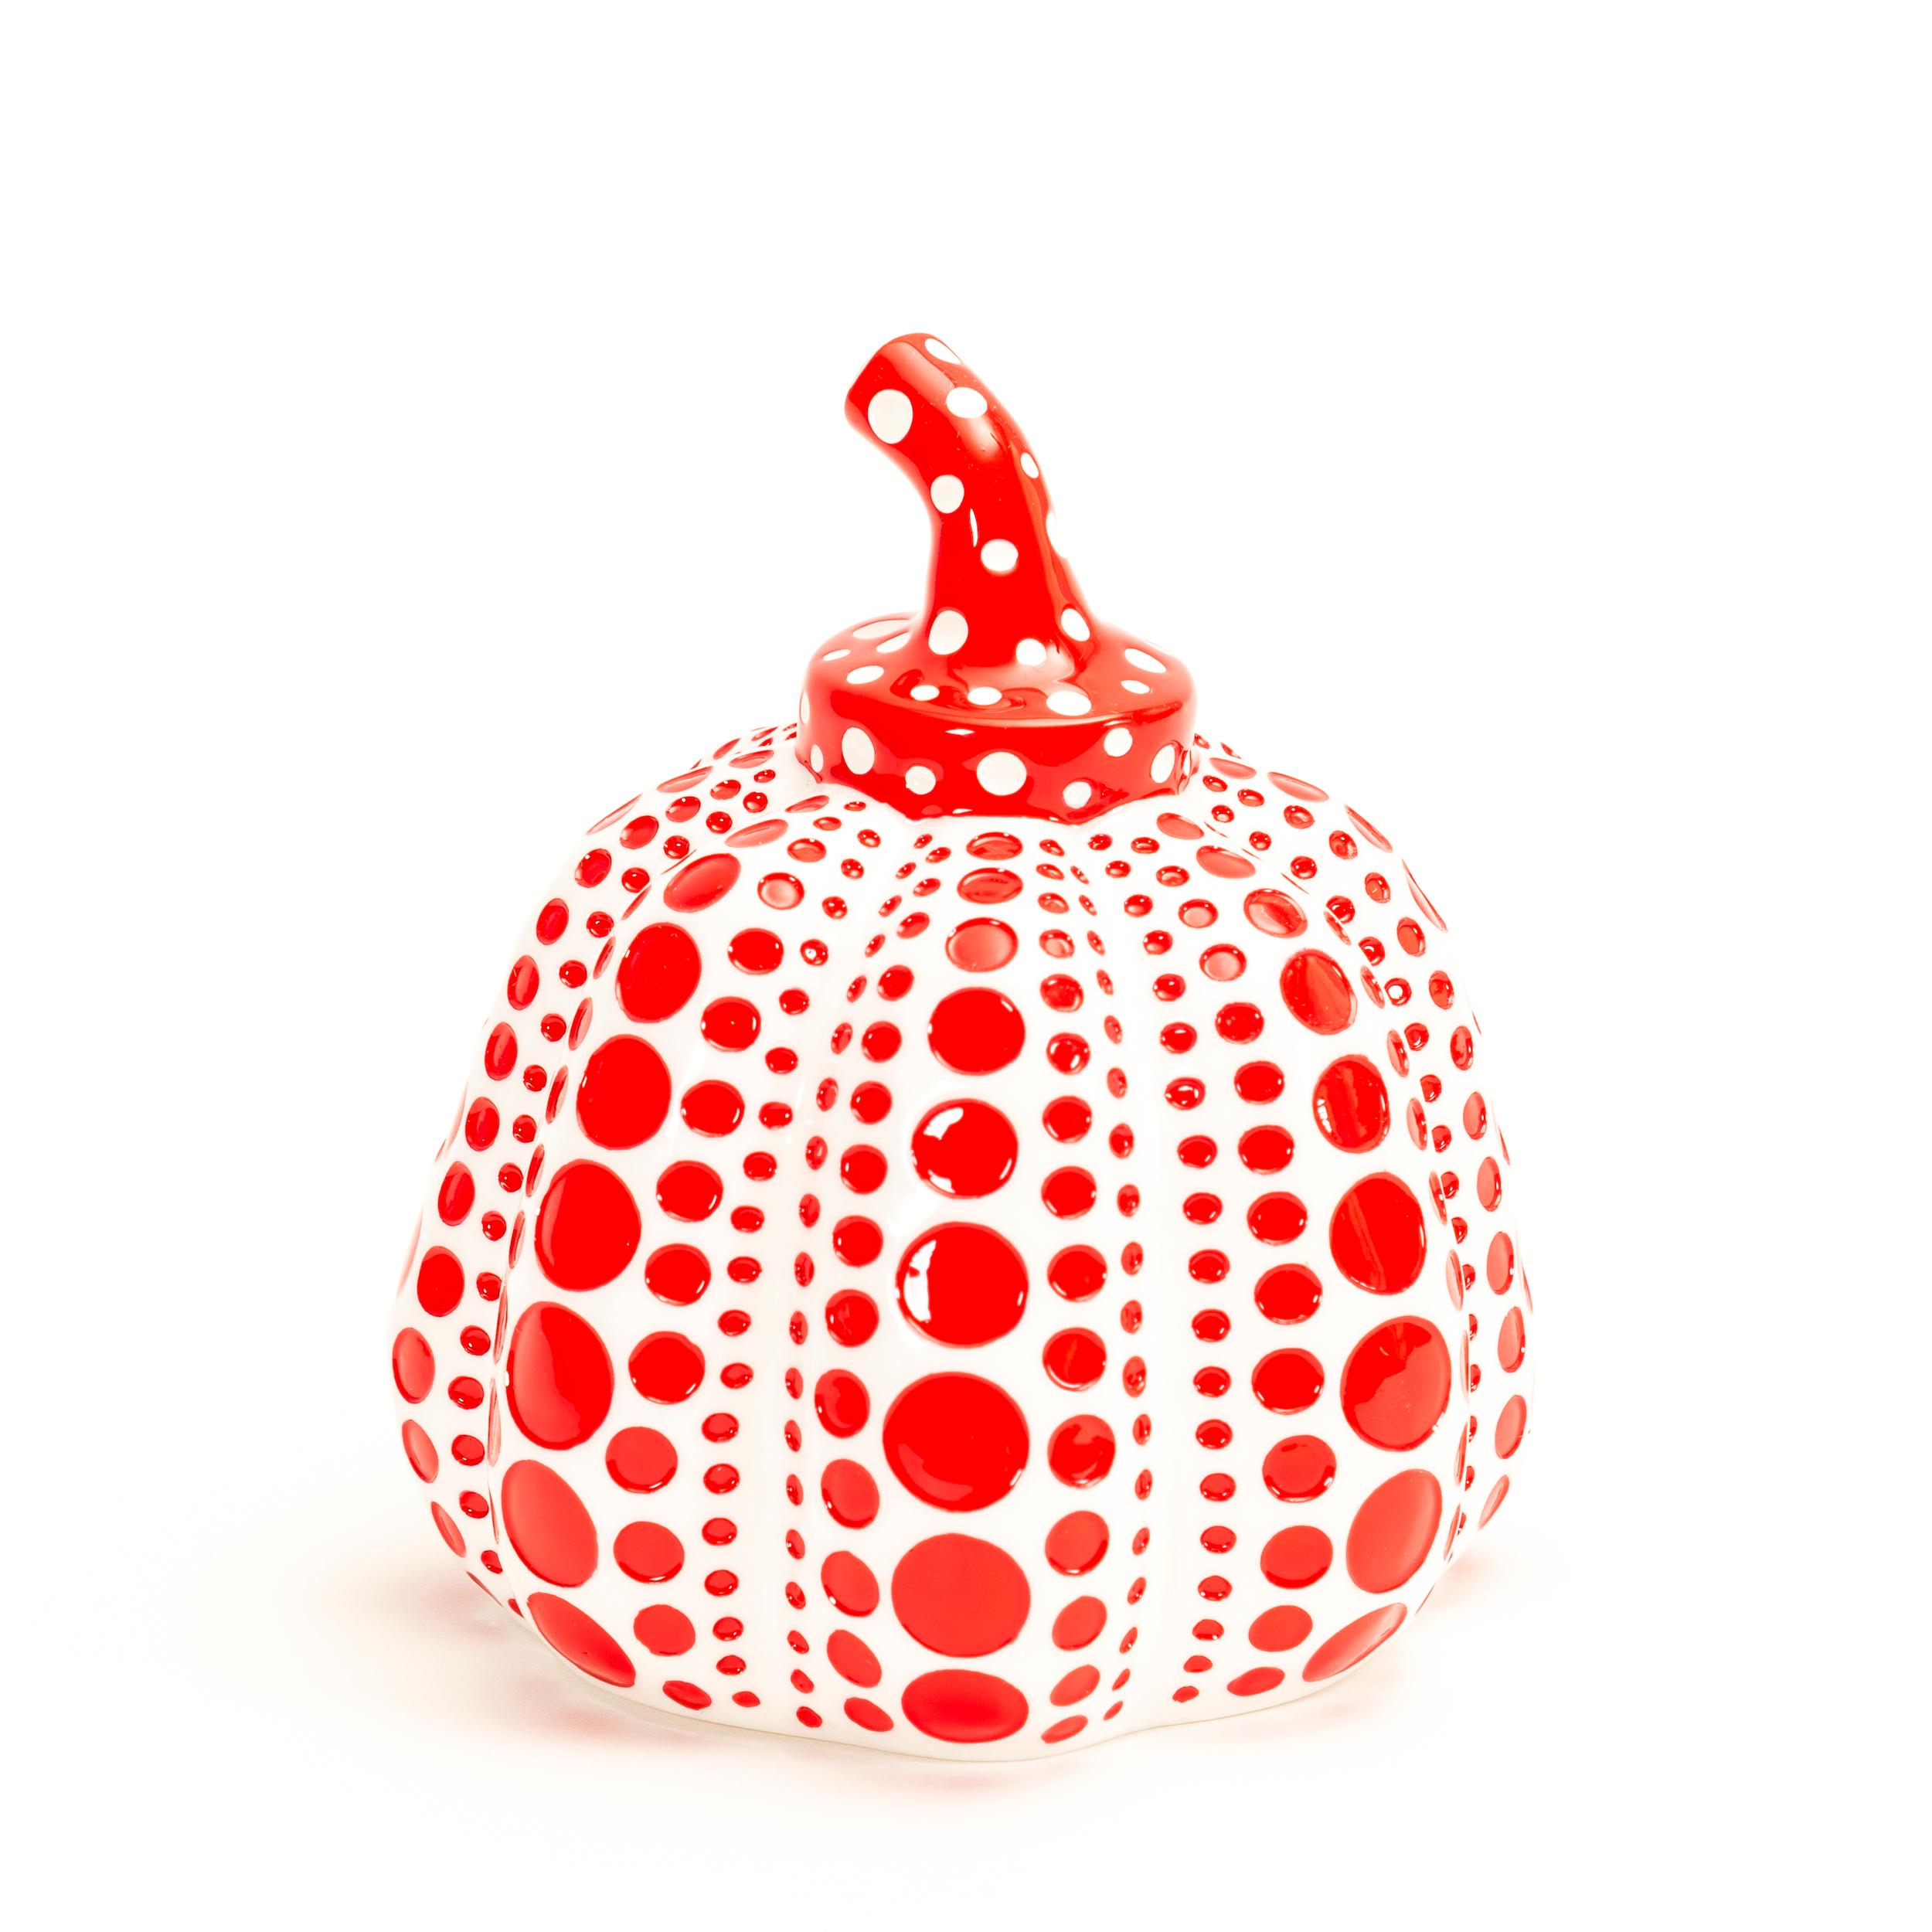 Pumpkin Objects (Pair White & Yellow) -- Sculptures, multiples by Yayoi Kusama 1